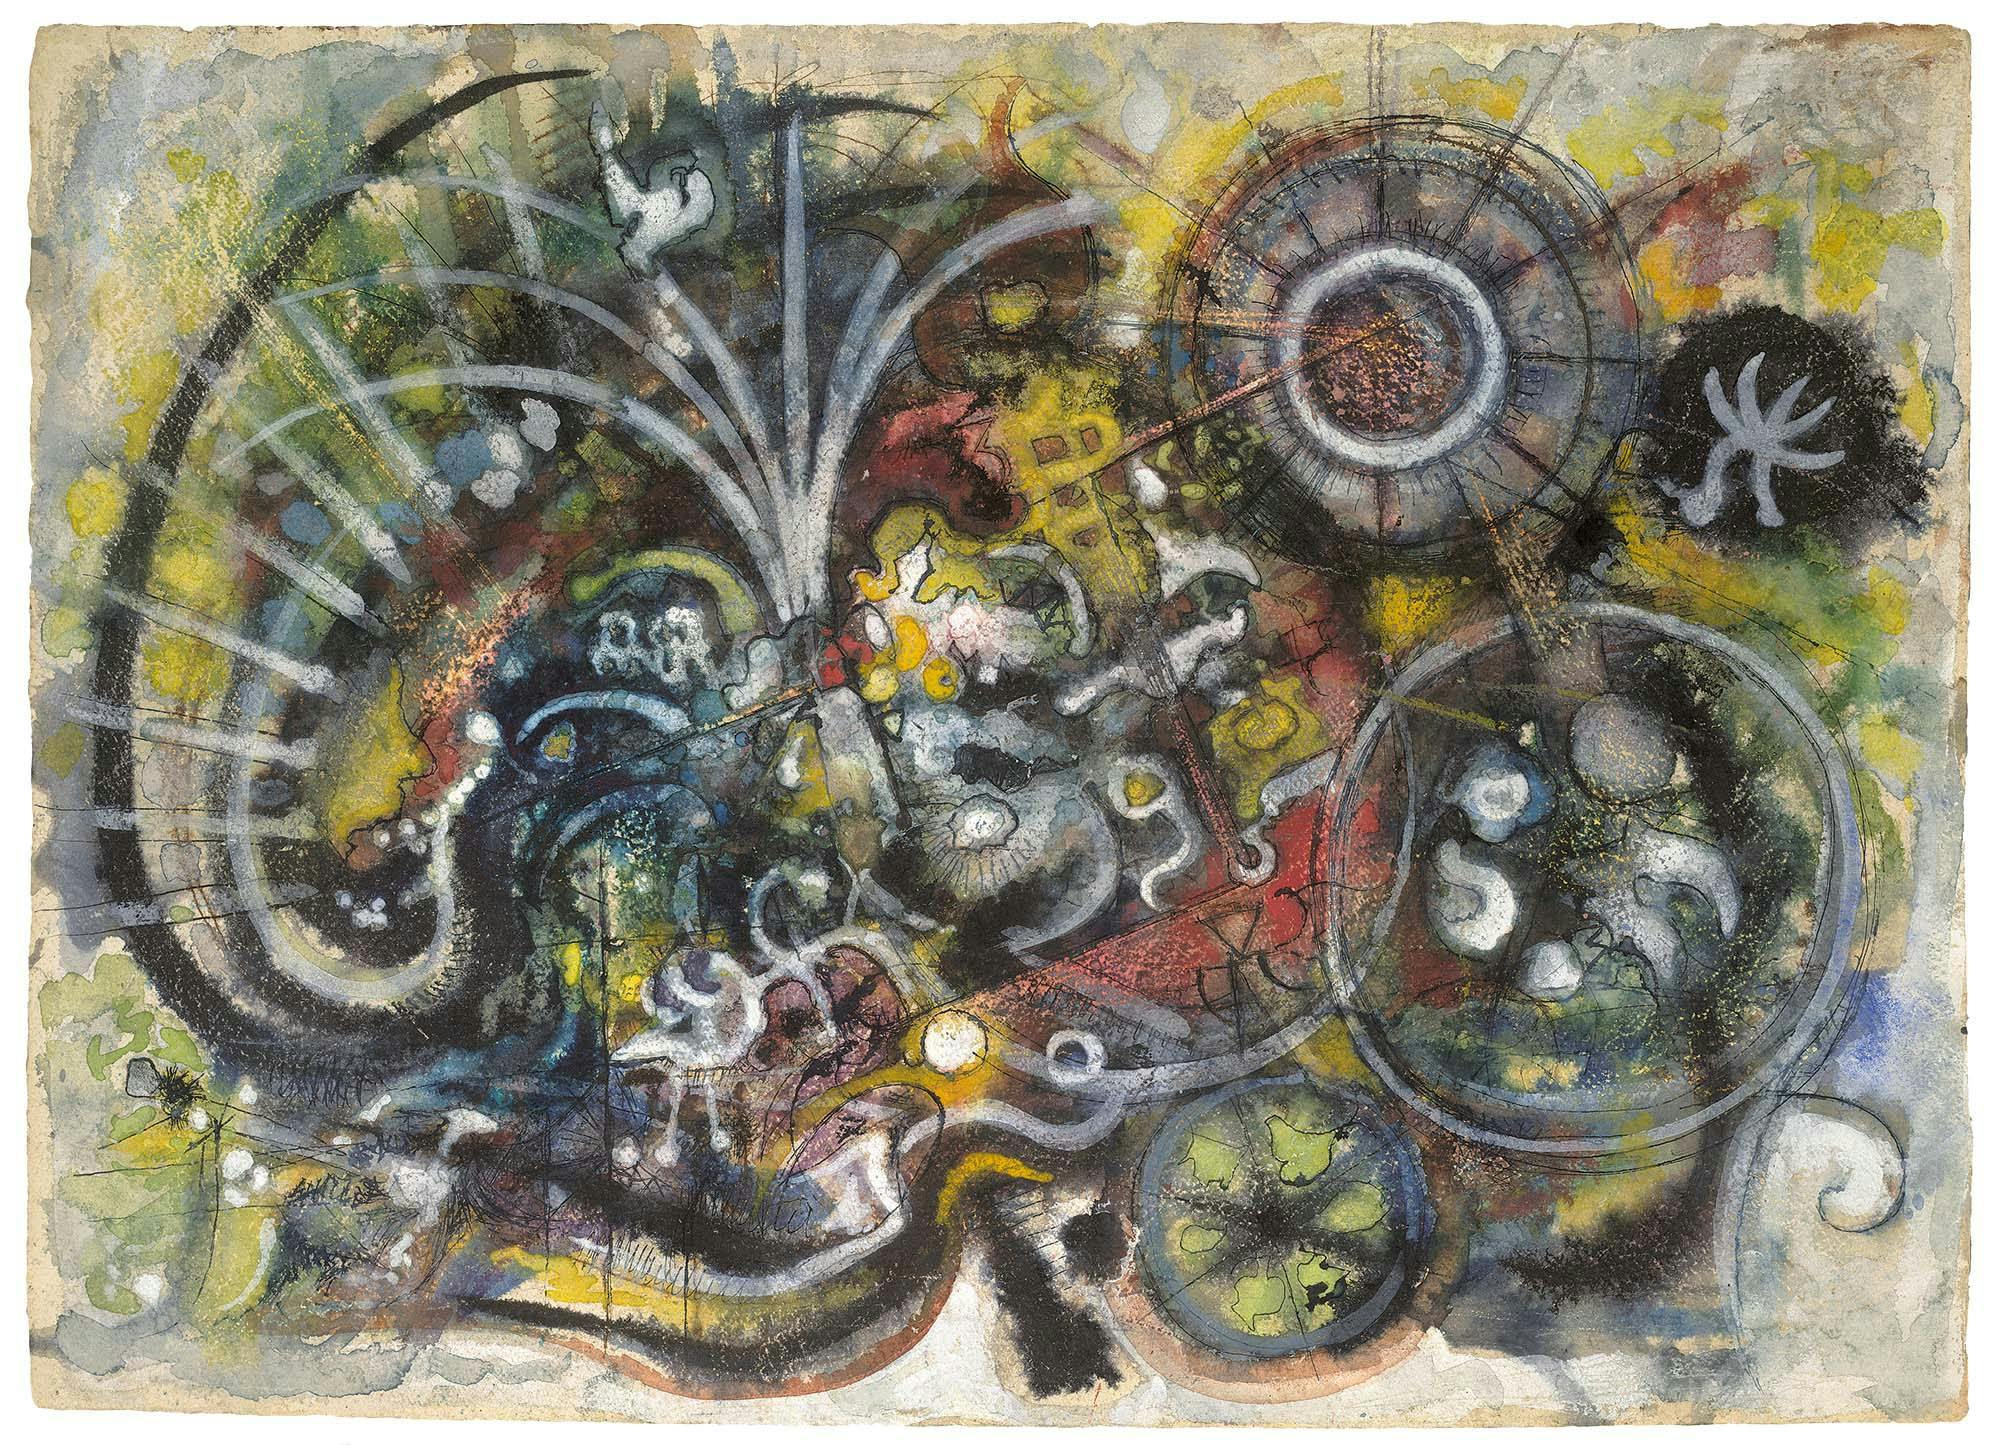 _[The Boundless Atom](https://pousette-dartfoundation.org/works/the-boundless-atom/)_, 1941–43, ink oil, gouache, and watercolor on paper, 22 ⅜ x 31 ⅛ in. (56.8 x 79 cm).
Albertina, Vienna, Austria, Permanent loan from the Austrian Ludwig Foundation for Art and Science (DL104r/v)
 – The Richard Pousette-Dart Foundation